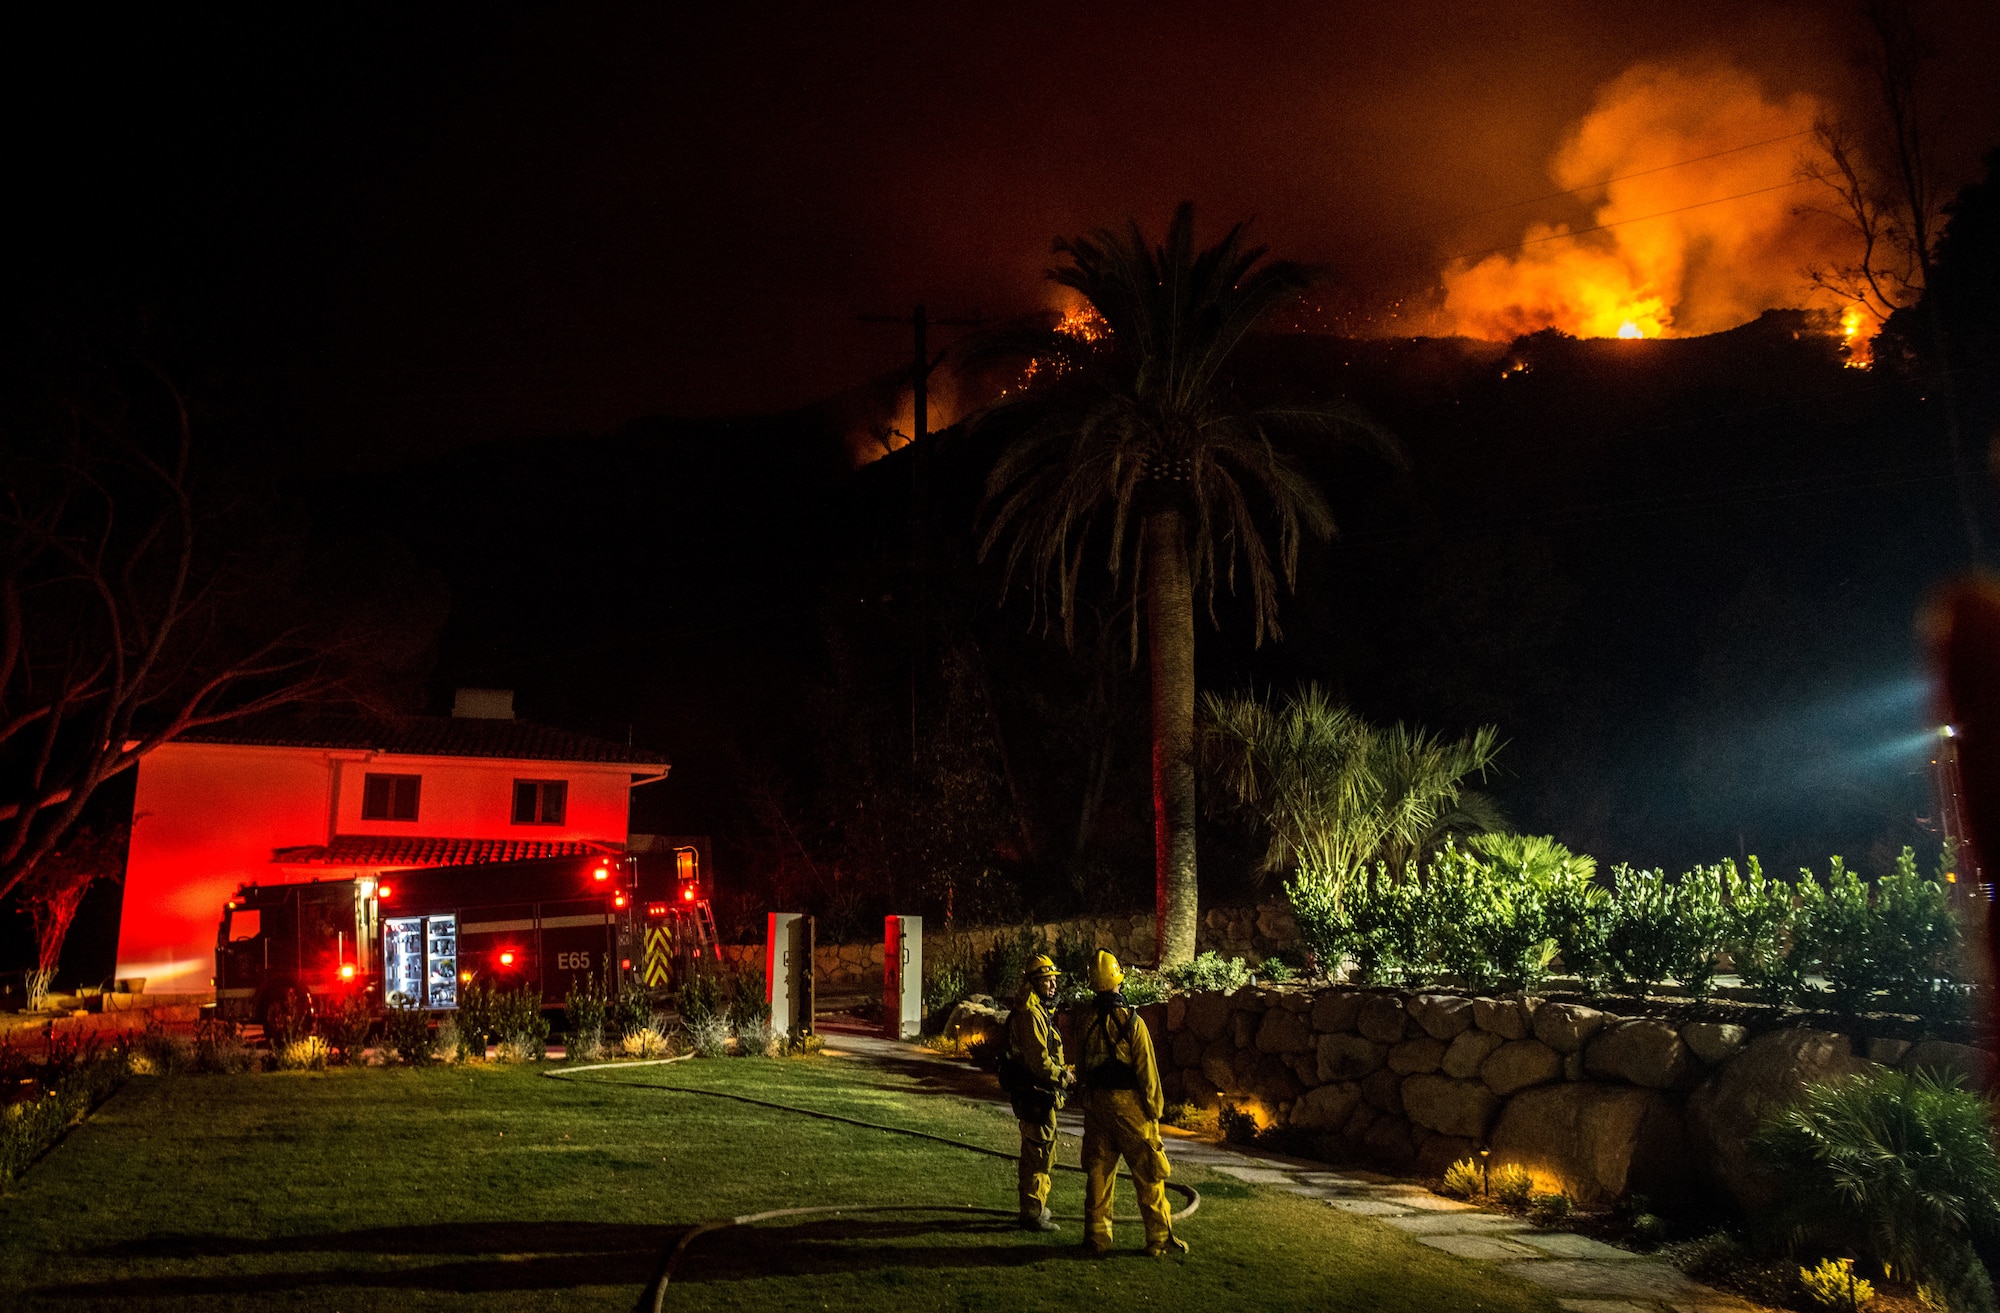 Chino Valley firefighters watch the oncoming flames of the Thomas Fire from the yard of a home in Montecito, California, Dec. 12, 2017. C-130Js of the 146th Airlift Wing at Channel Islands Air National Guard Base in Port Hueneme, carried the Modular Airborne Fire Fighting System and dropped fire suppression chemicals onto the fire's path to slow its advance in support of firefighters on the ground. (U.S. Air Force photo by J.M. Eddins Jr.)